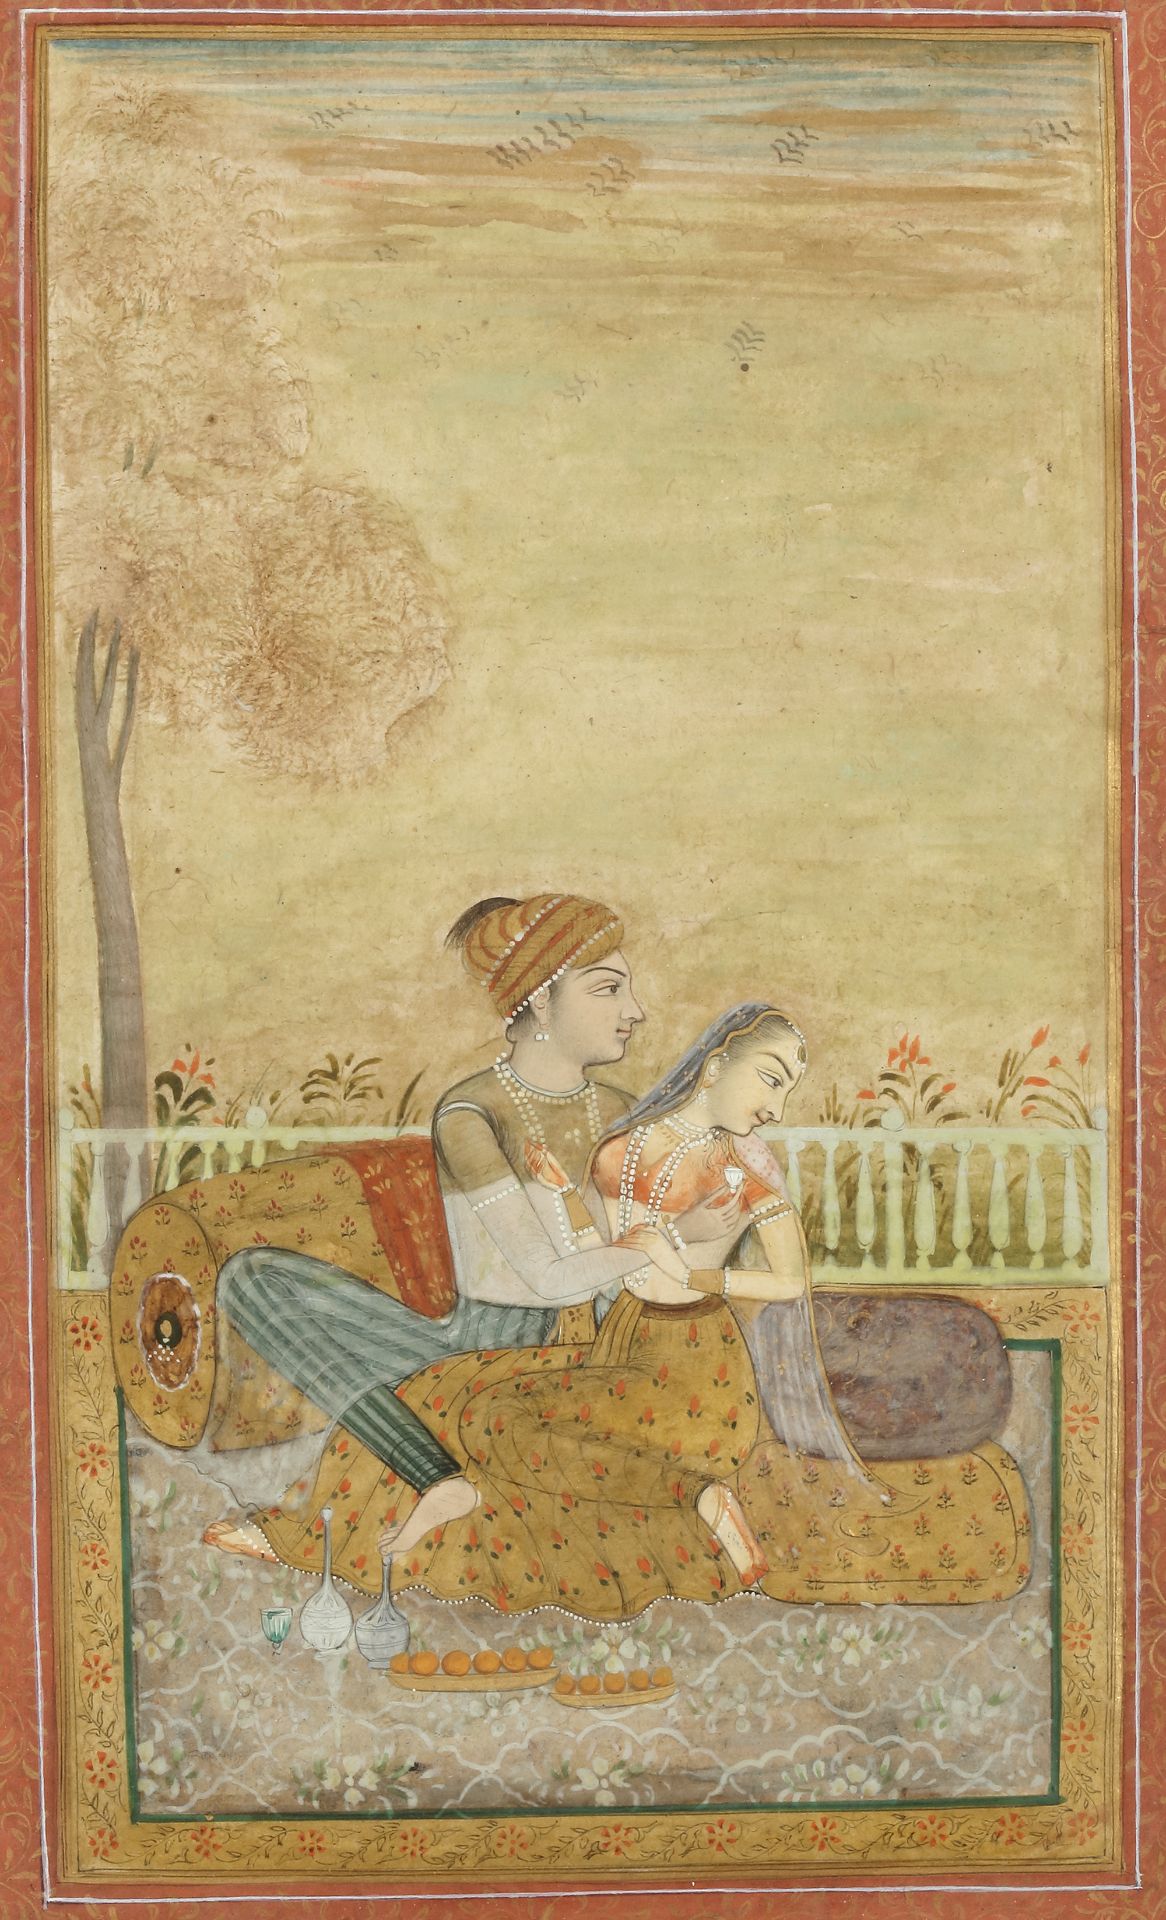 A COUPLE EMBRACING ON A TERRACE, NORTH INDIA, CIRCA 19TH CENTURY